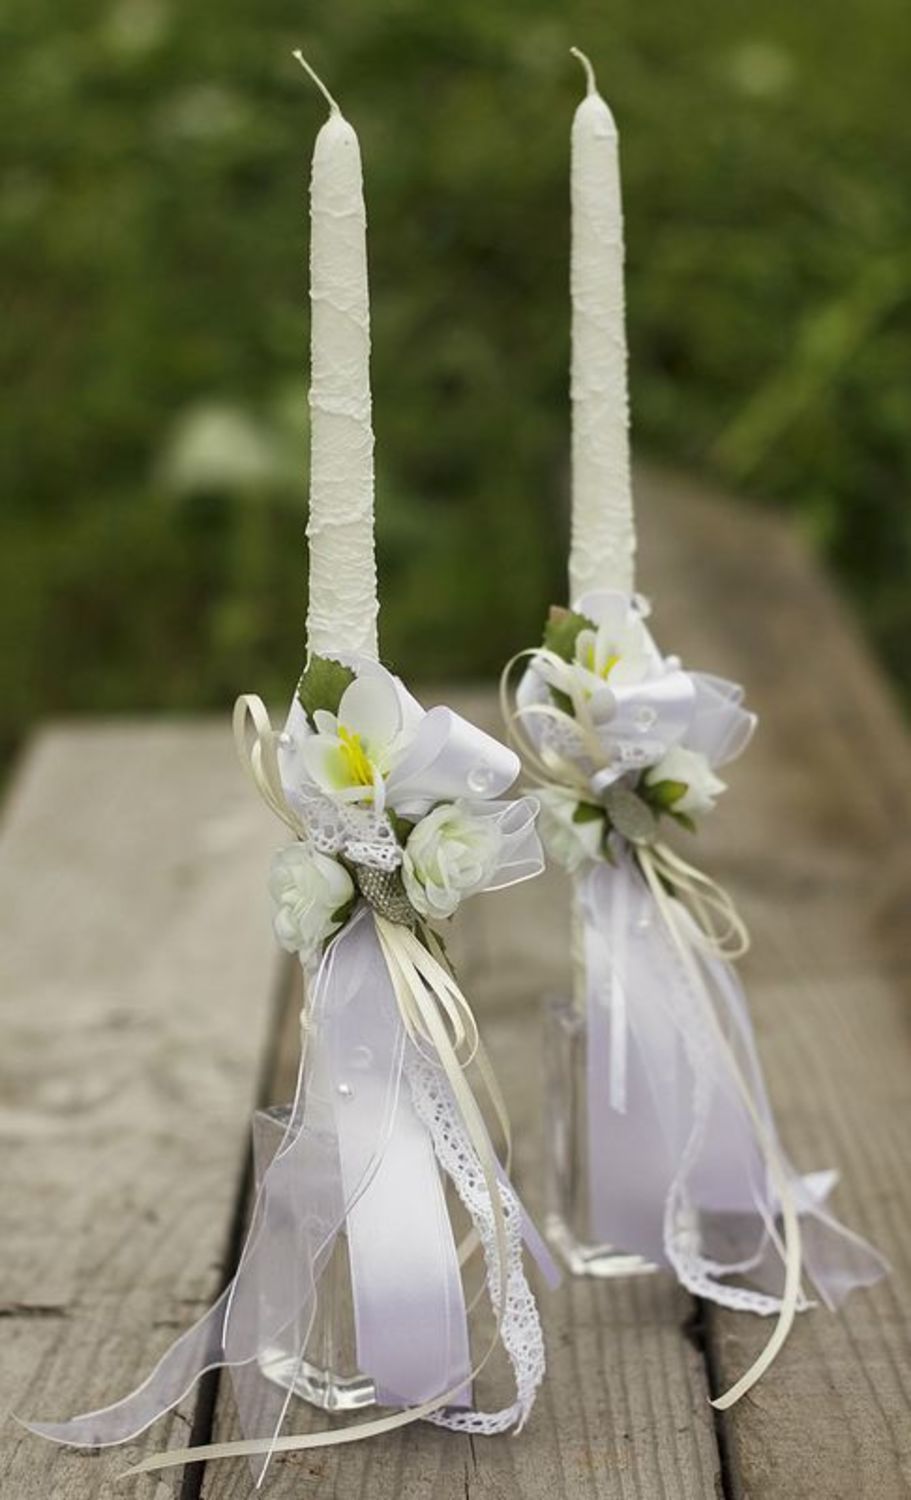 Wedding candle with white ribbons photo 3